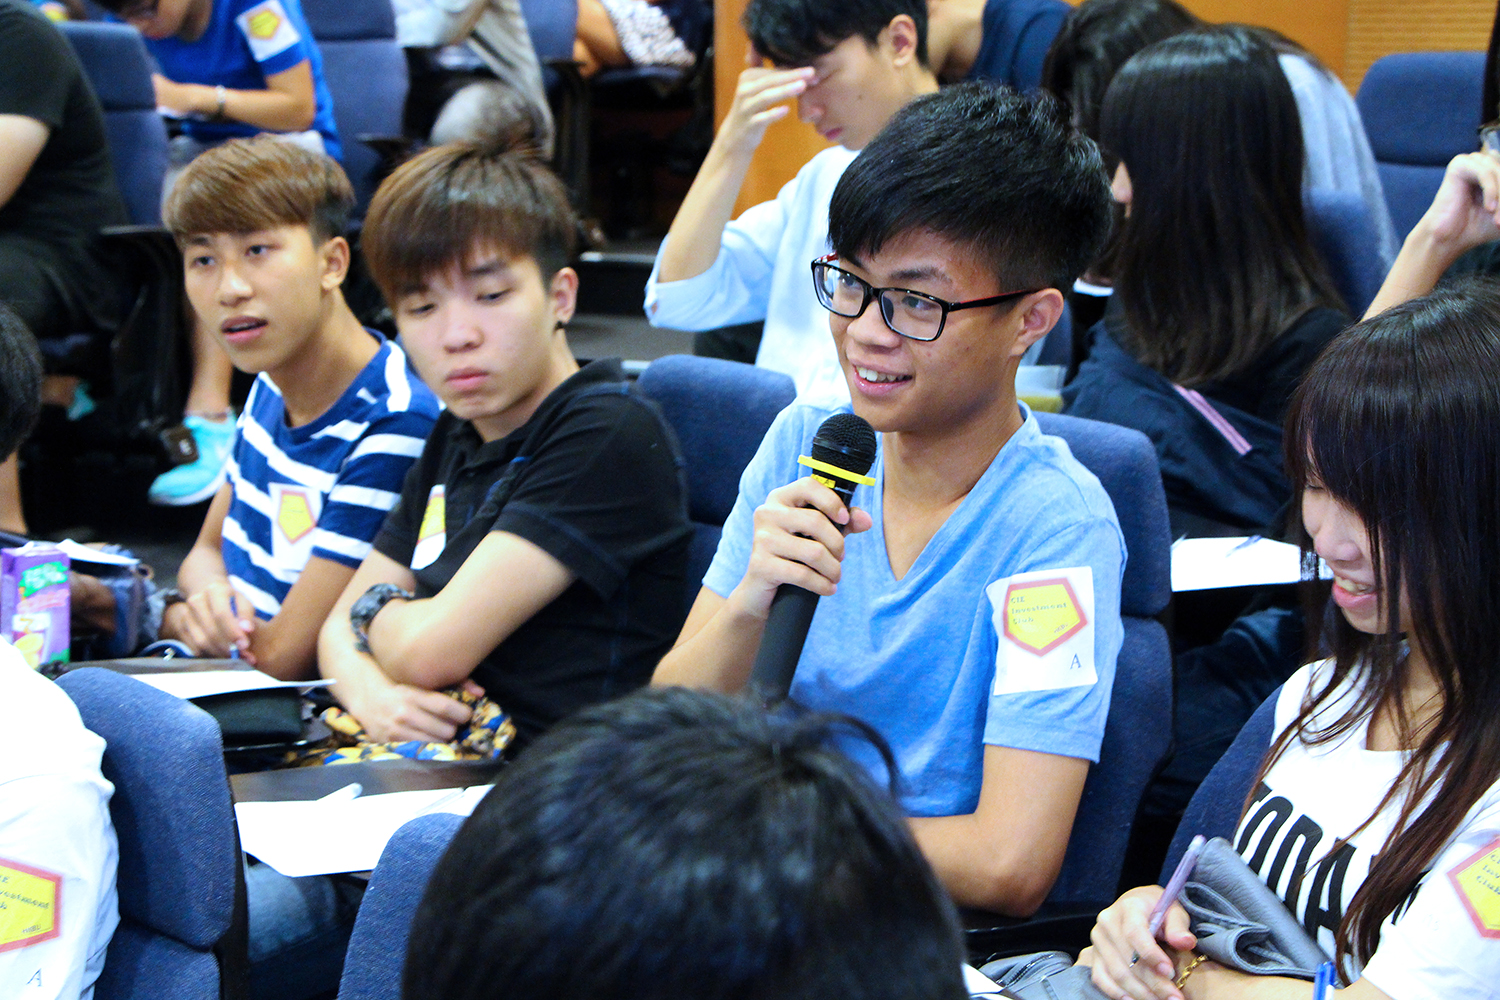 Students raised questions about the financial trends such as －the impact of RMB devaluation on the stock market.